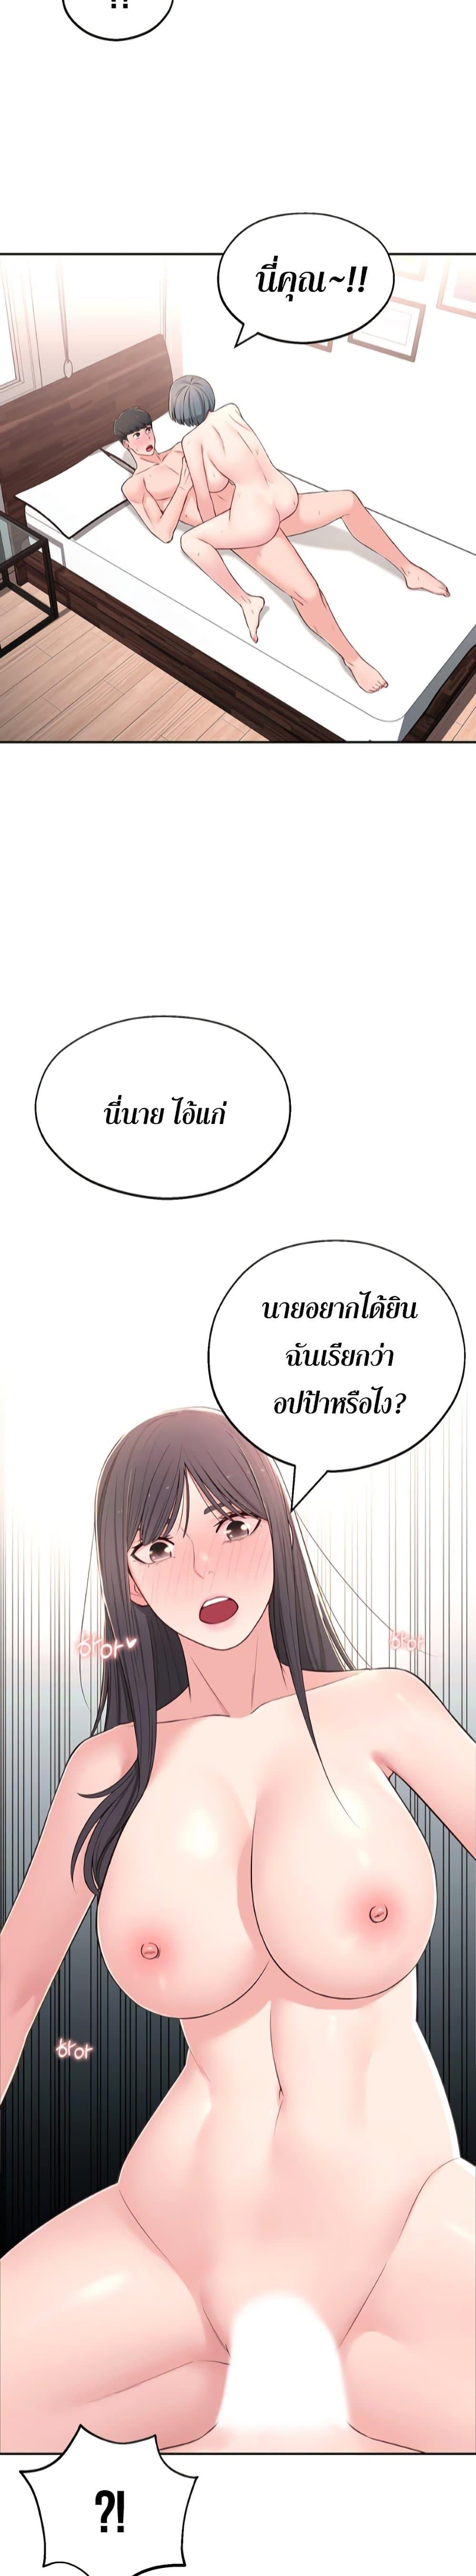 A Knowing Sister 7 ภาพ 6